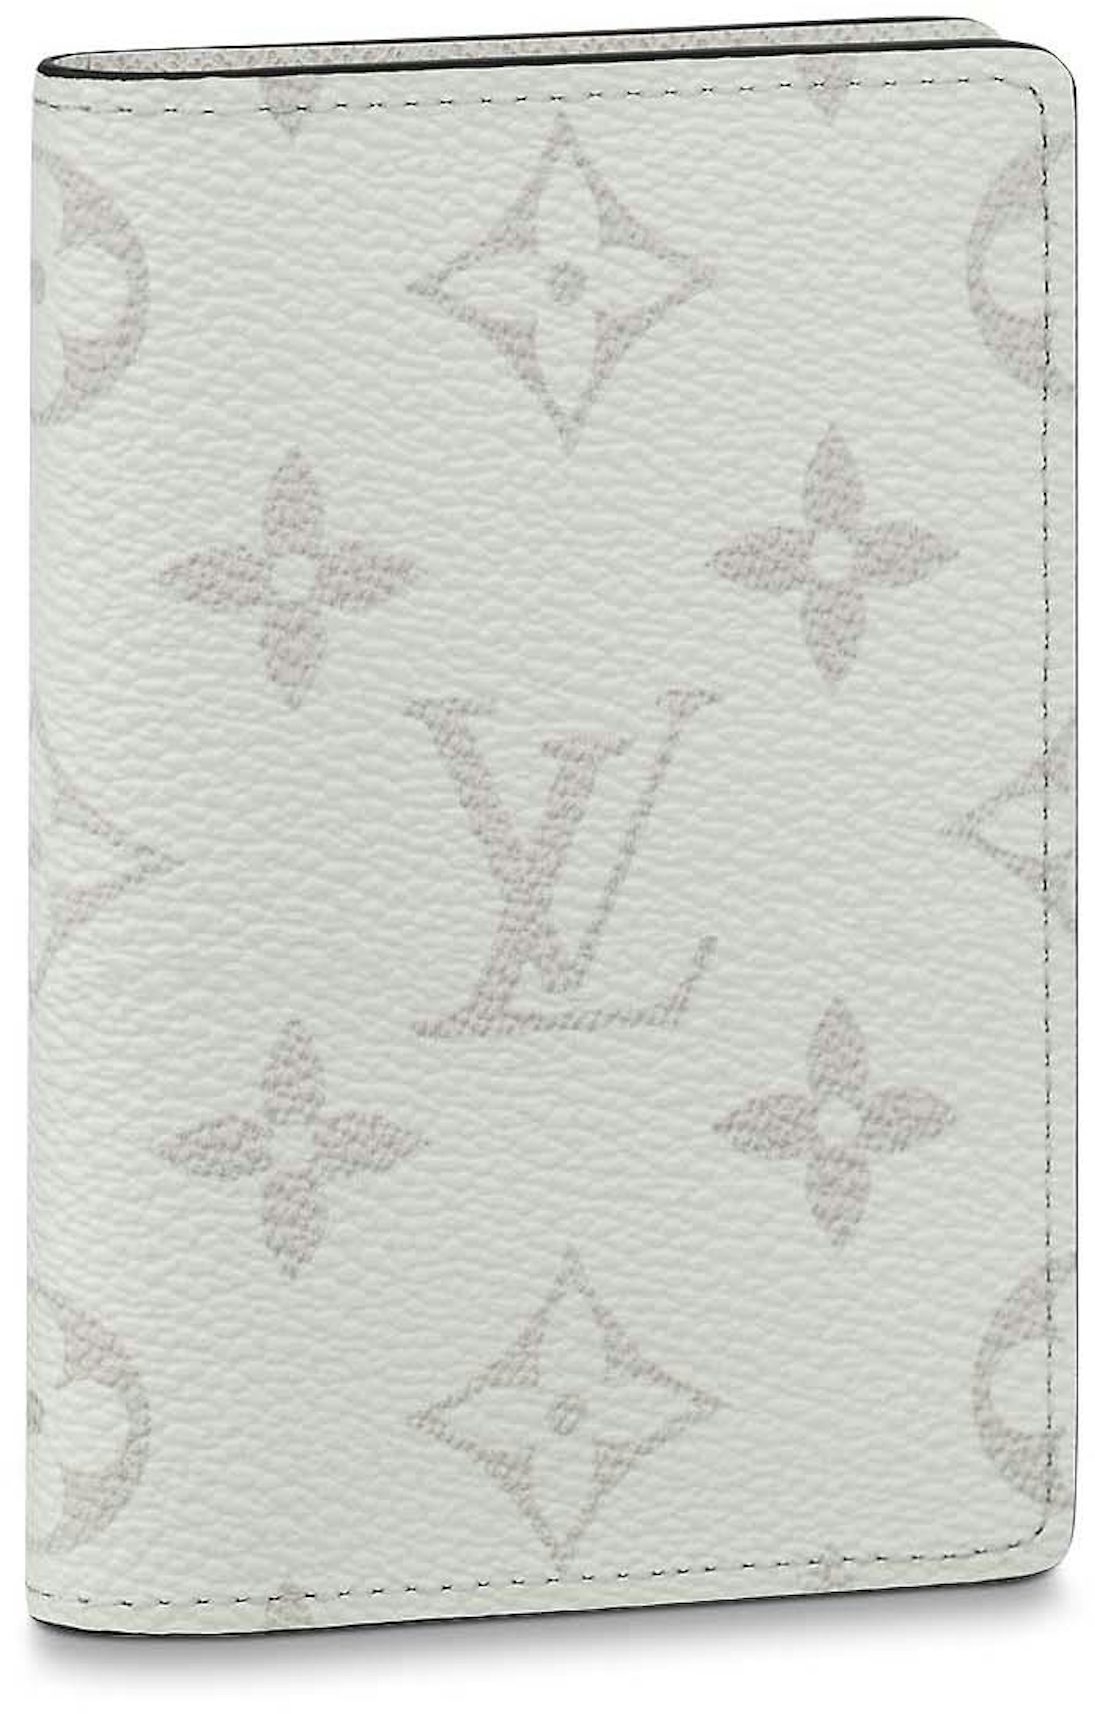 Buy Louis Vuitton Other Key Pouch Accessories - Color White - StockX